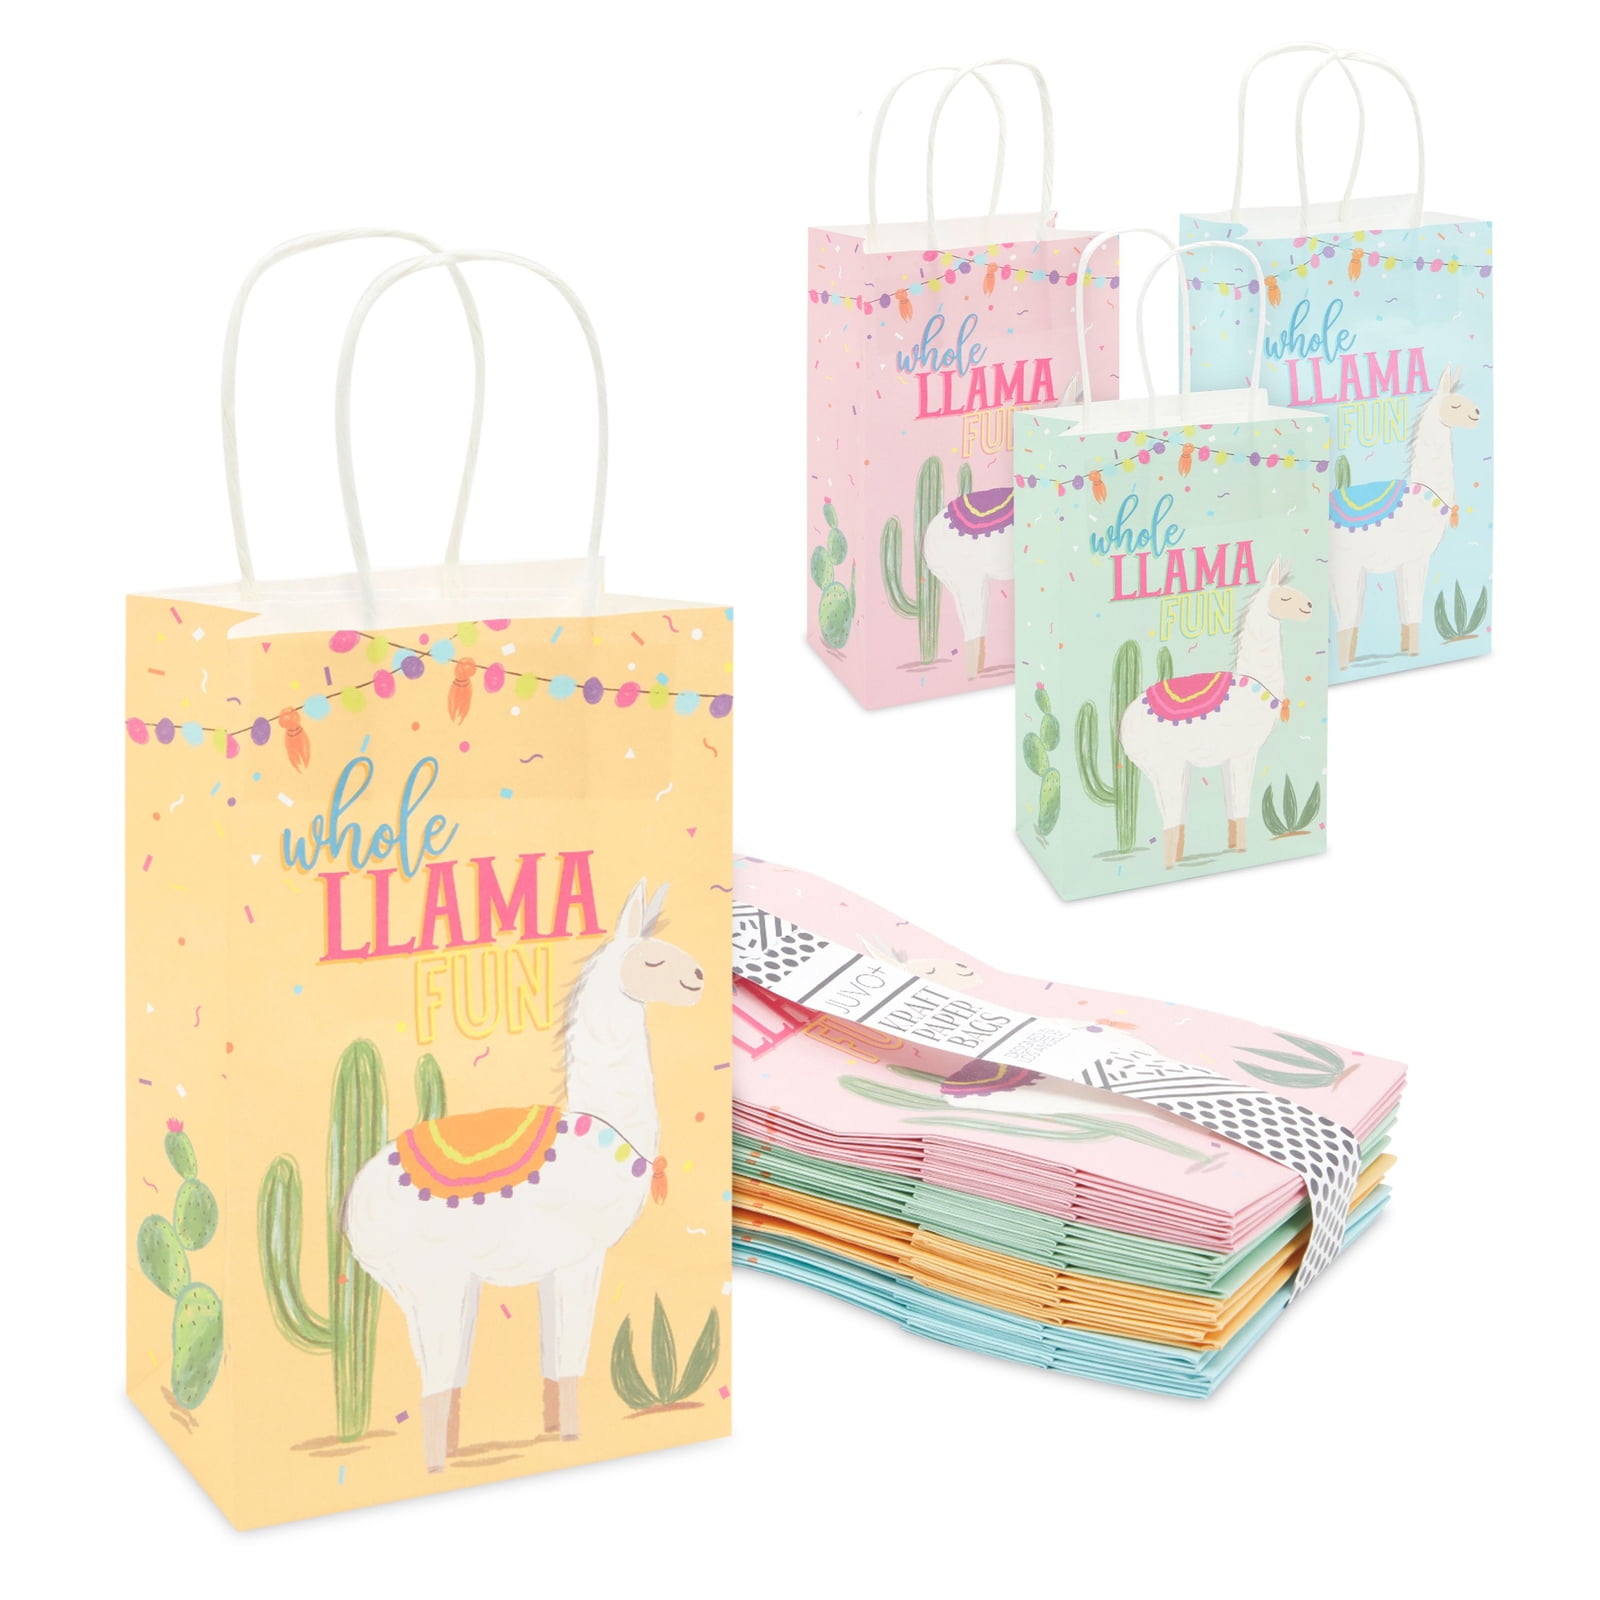 8 x Llama Birthday Party Favour Loot Bags Mexican Fiesta Birthday Party 